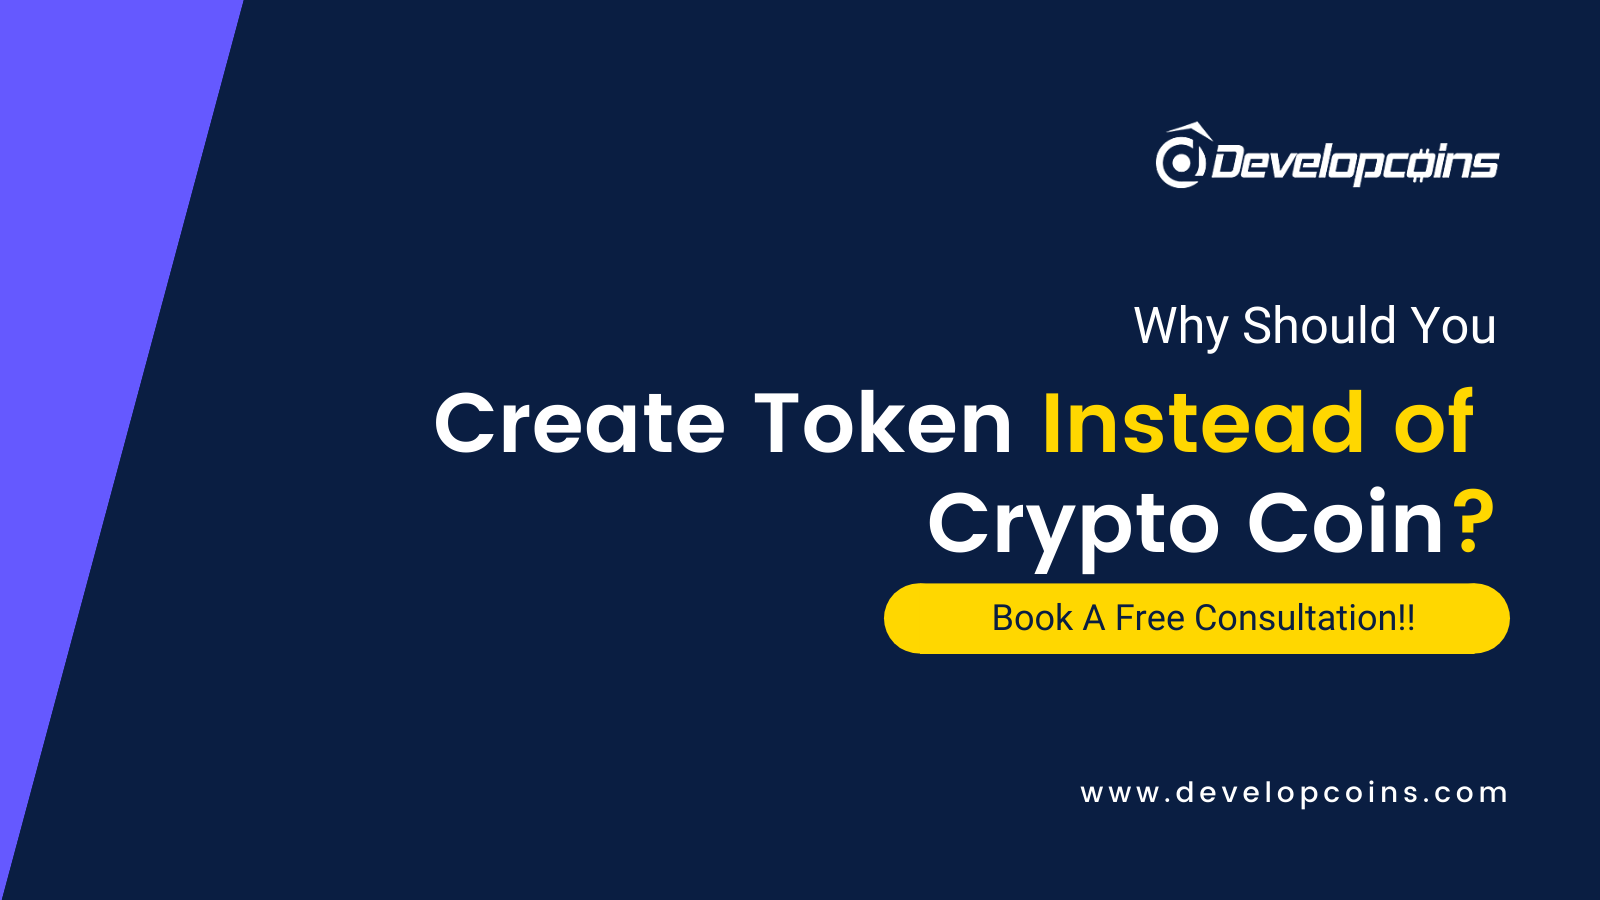 Why Need To Create Crypto Token instead of Coin?